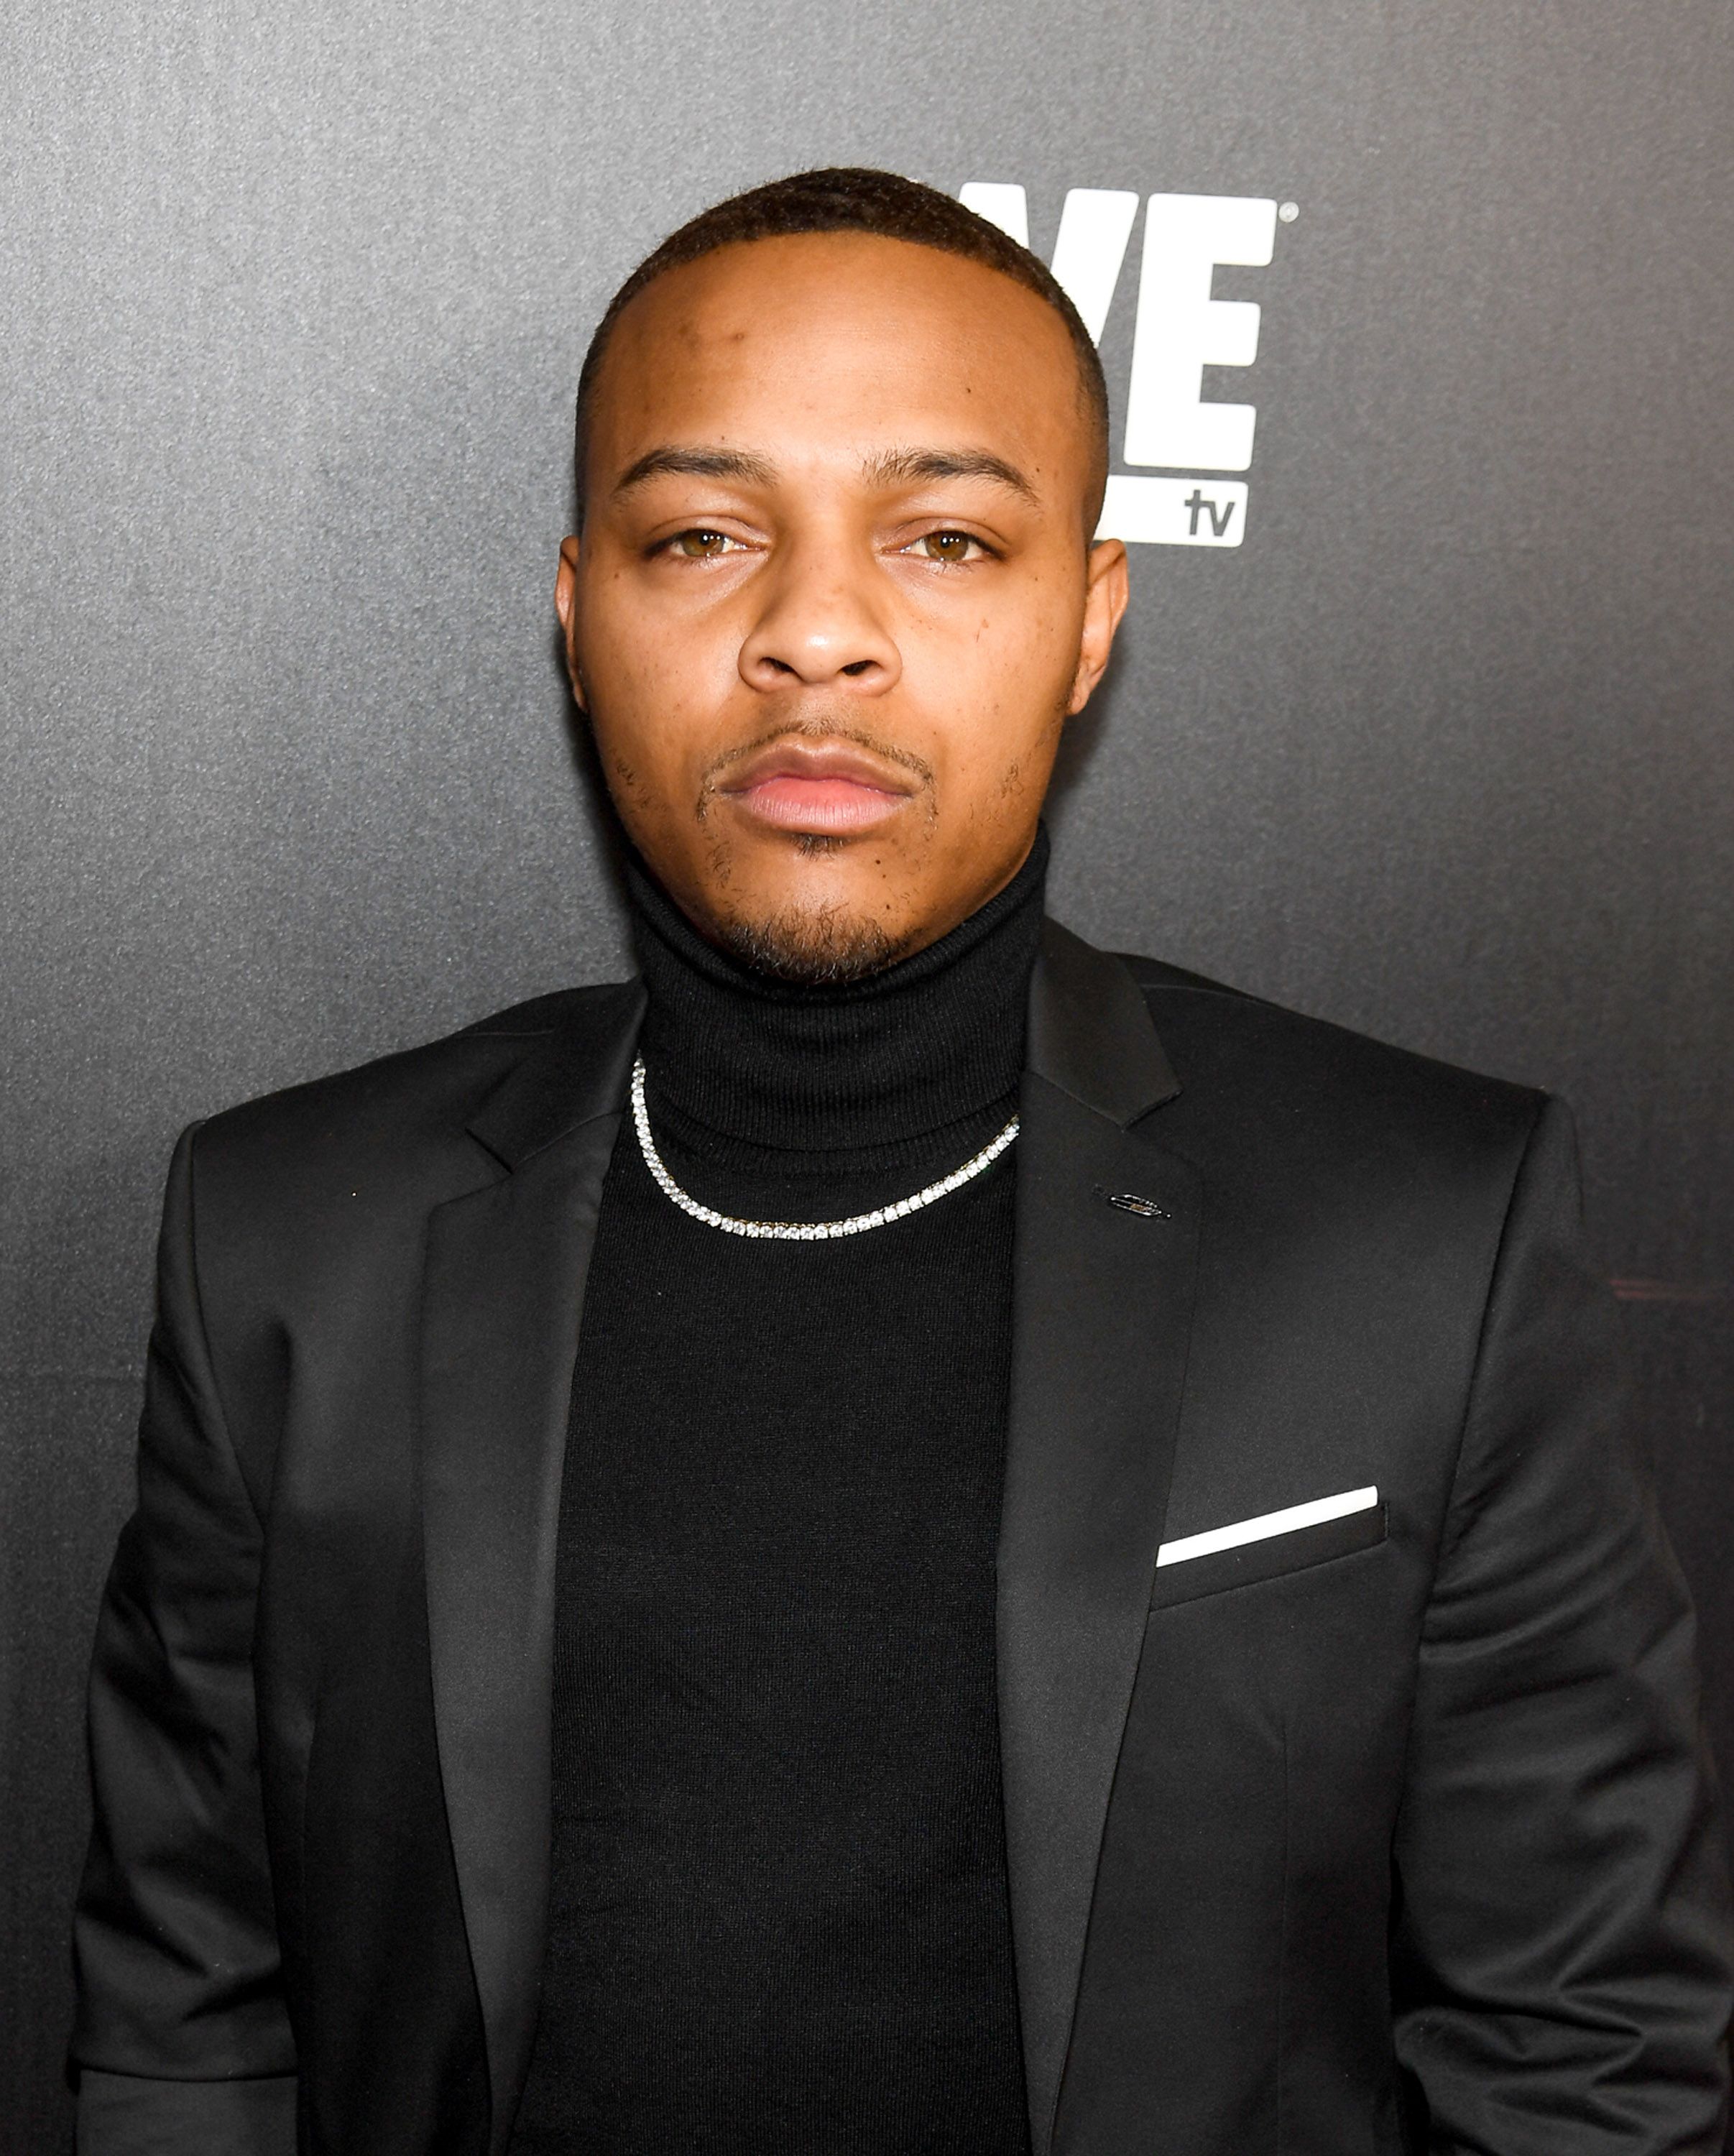 Bow Wow at Woodruff Arts Center in Atlanta on January 9, 2018. | Photo: Getty Images